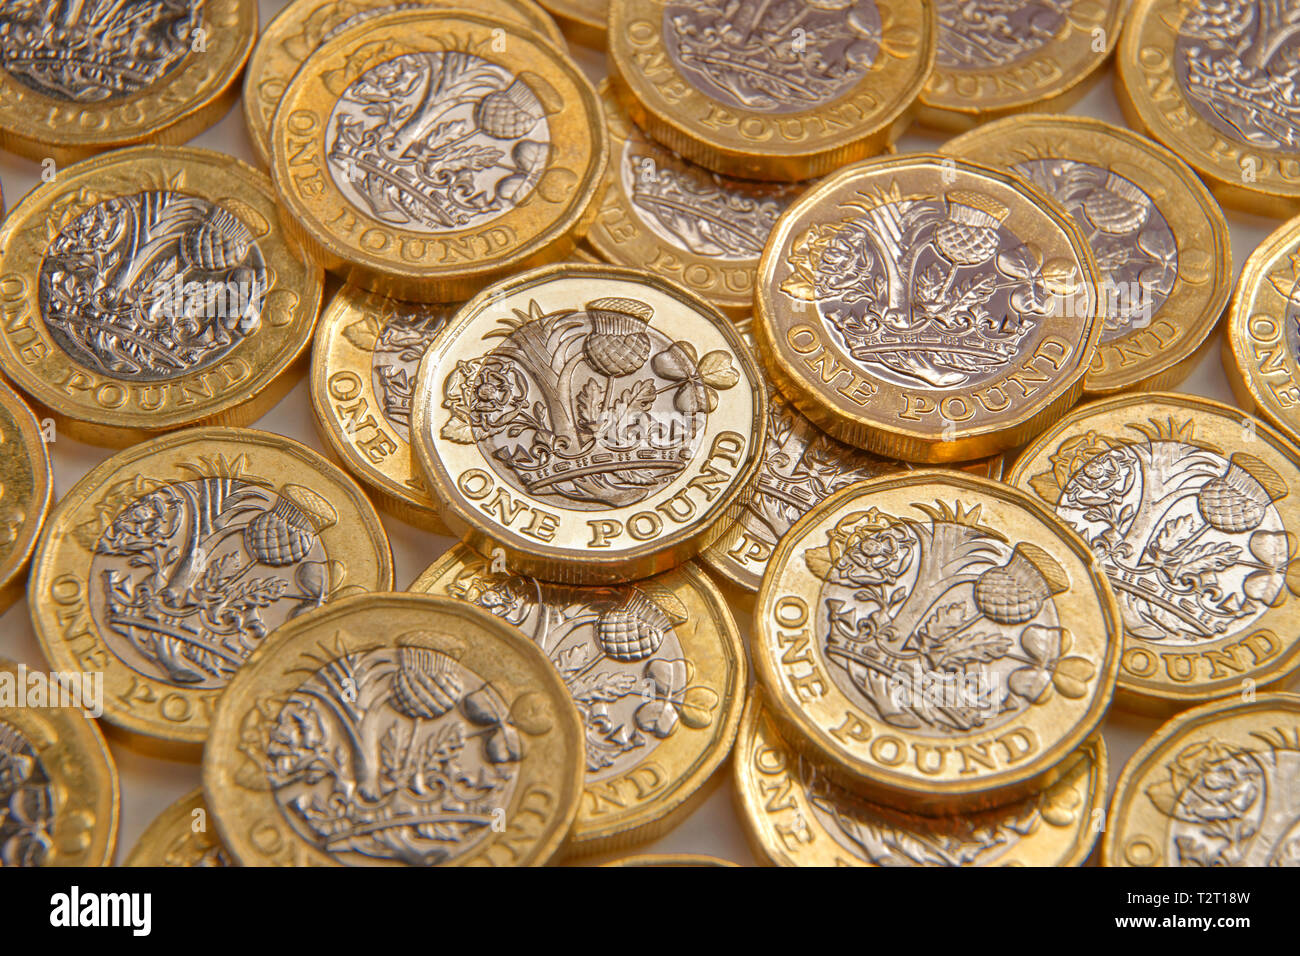 UK Pound Sterling coins. Stock Photo